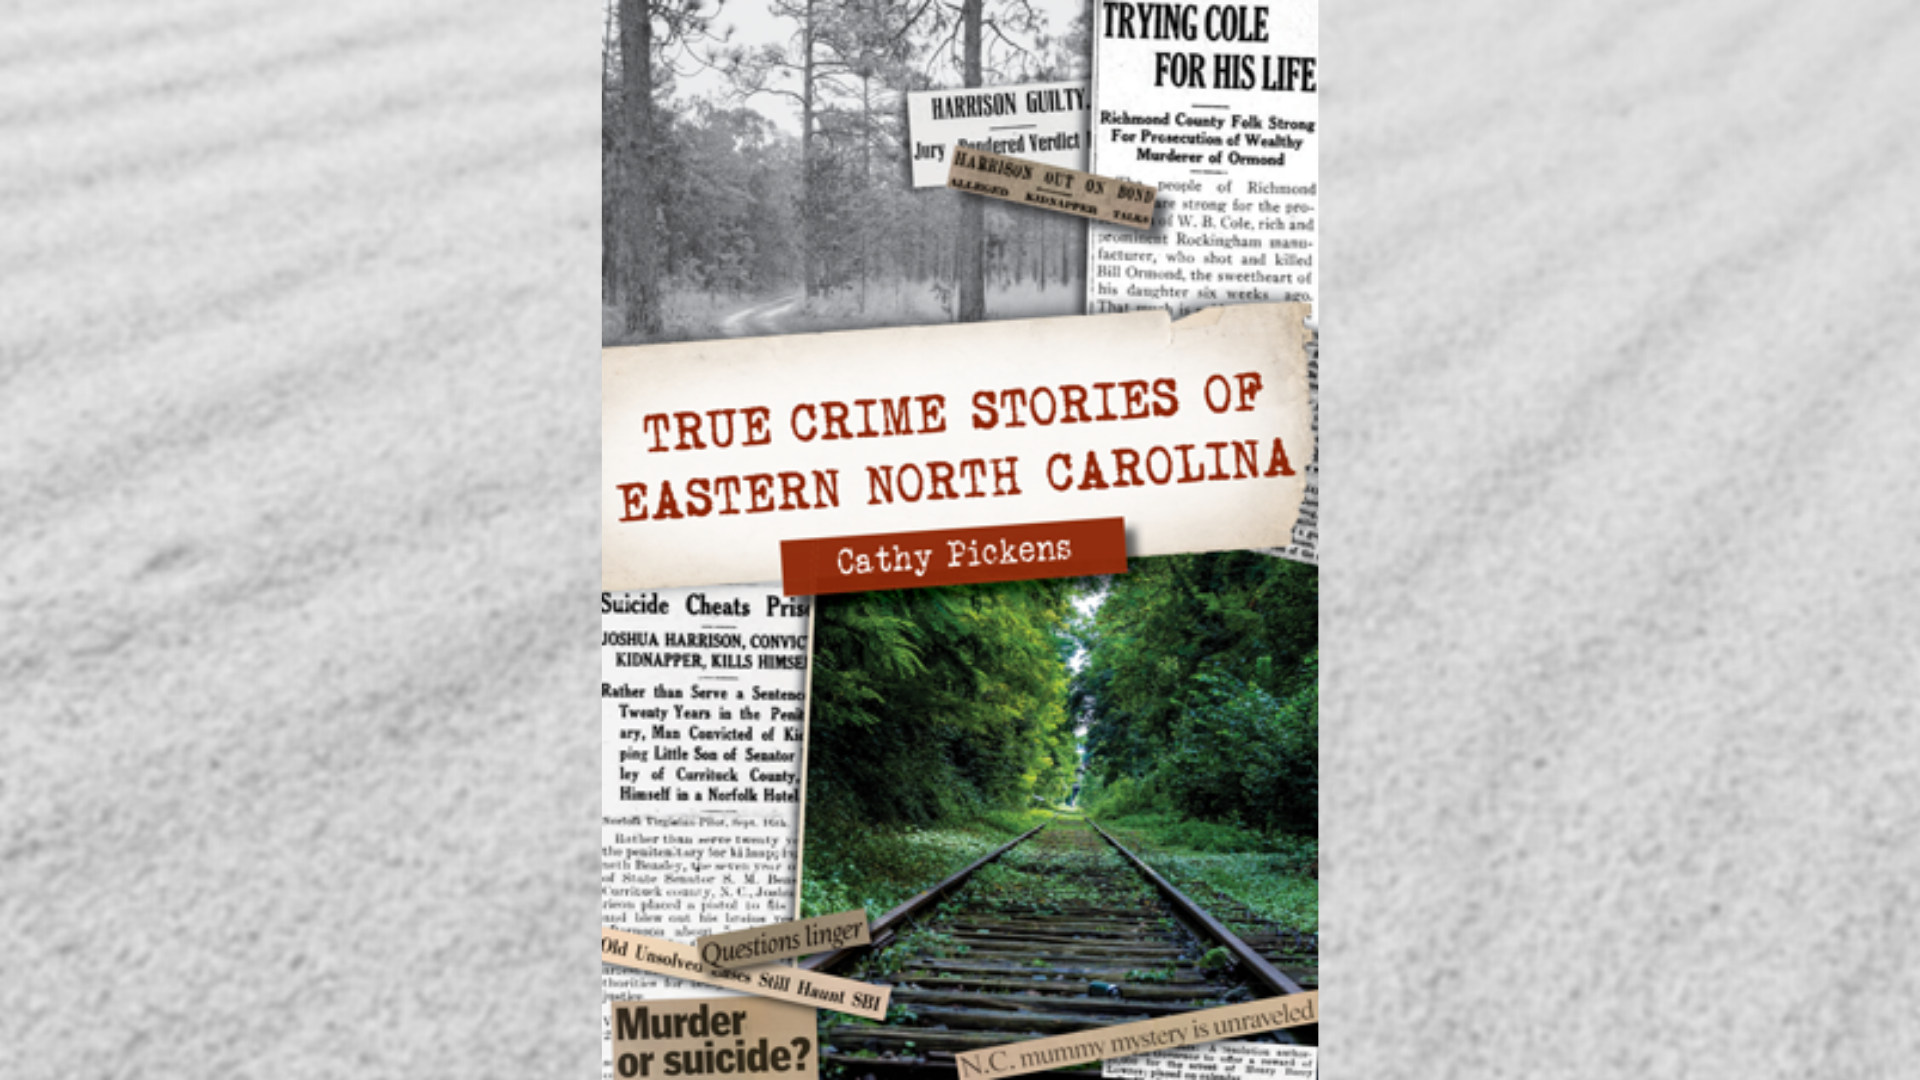 Meet the Author of True Crime Stories of Eastern North Carolina